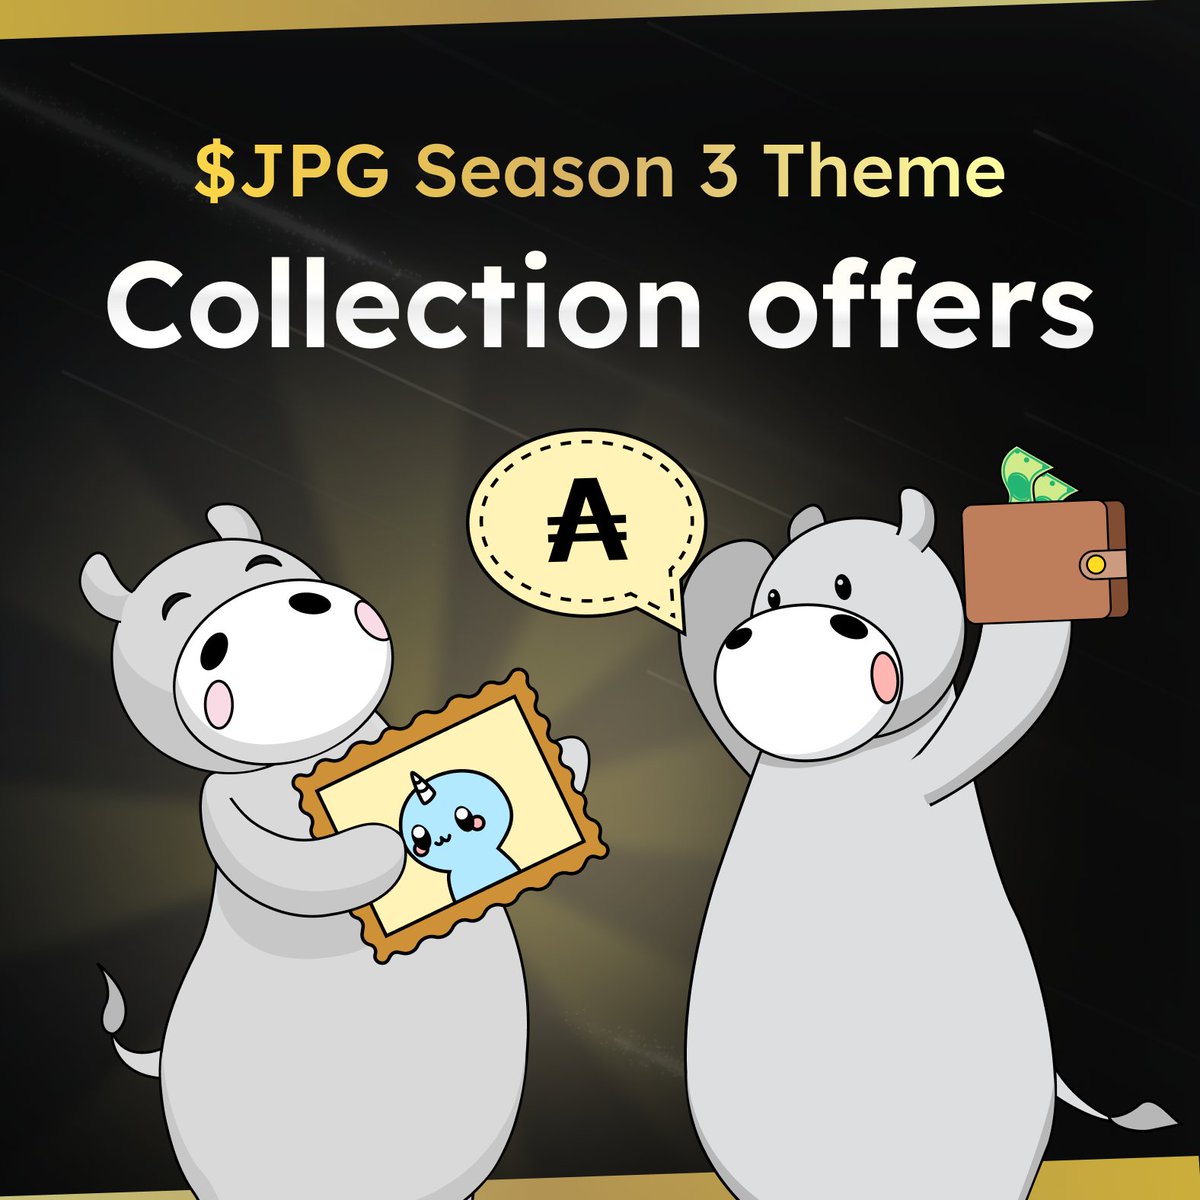 This feature alone has helped thousands of users get up to 40% discount on floor NFTs. It’s the chosen Season 3 Theme: ➜ Collection Offers 📥 Unlock your NFTs’ liquidity, enjoy extra XP 🔓 More details coming soon.